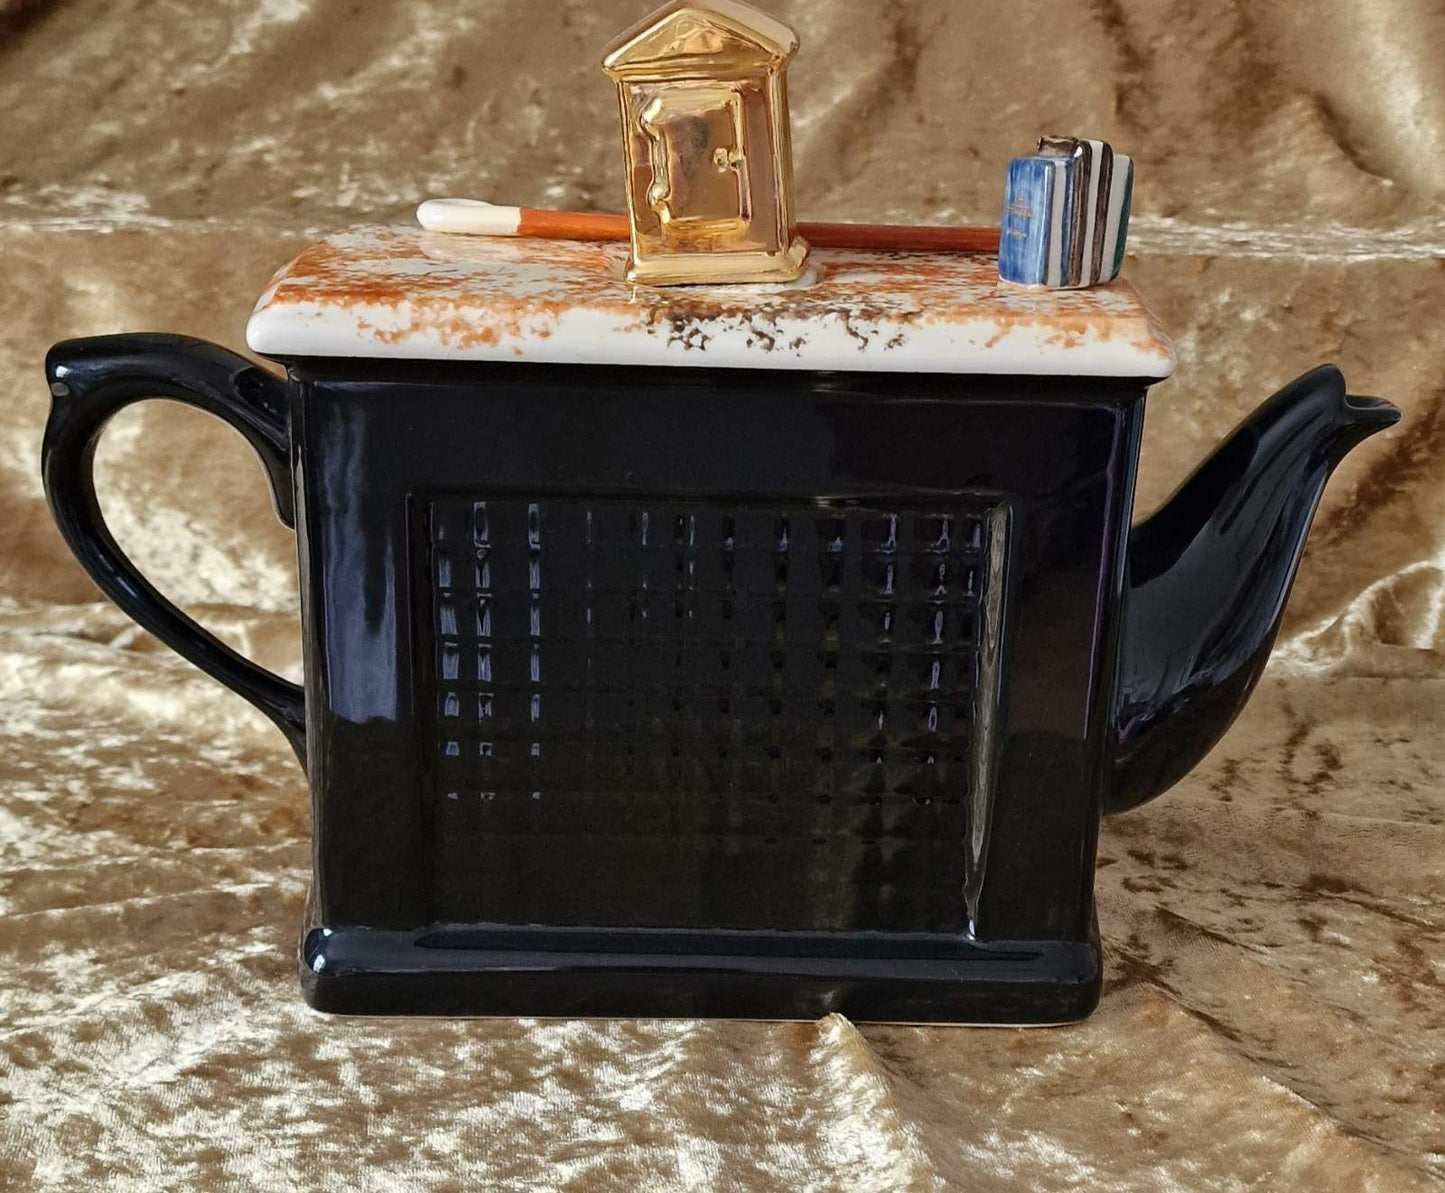 Unique black teapot with fireplace and clock, a prized collectible from Teapottery Company in Yorkshire.